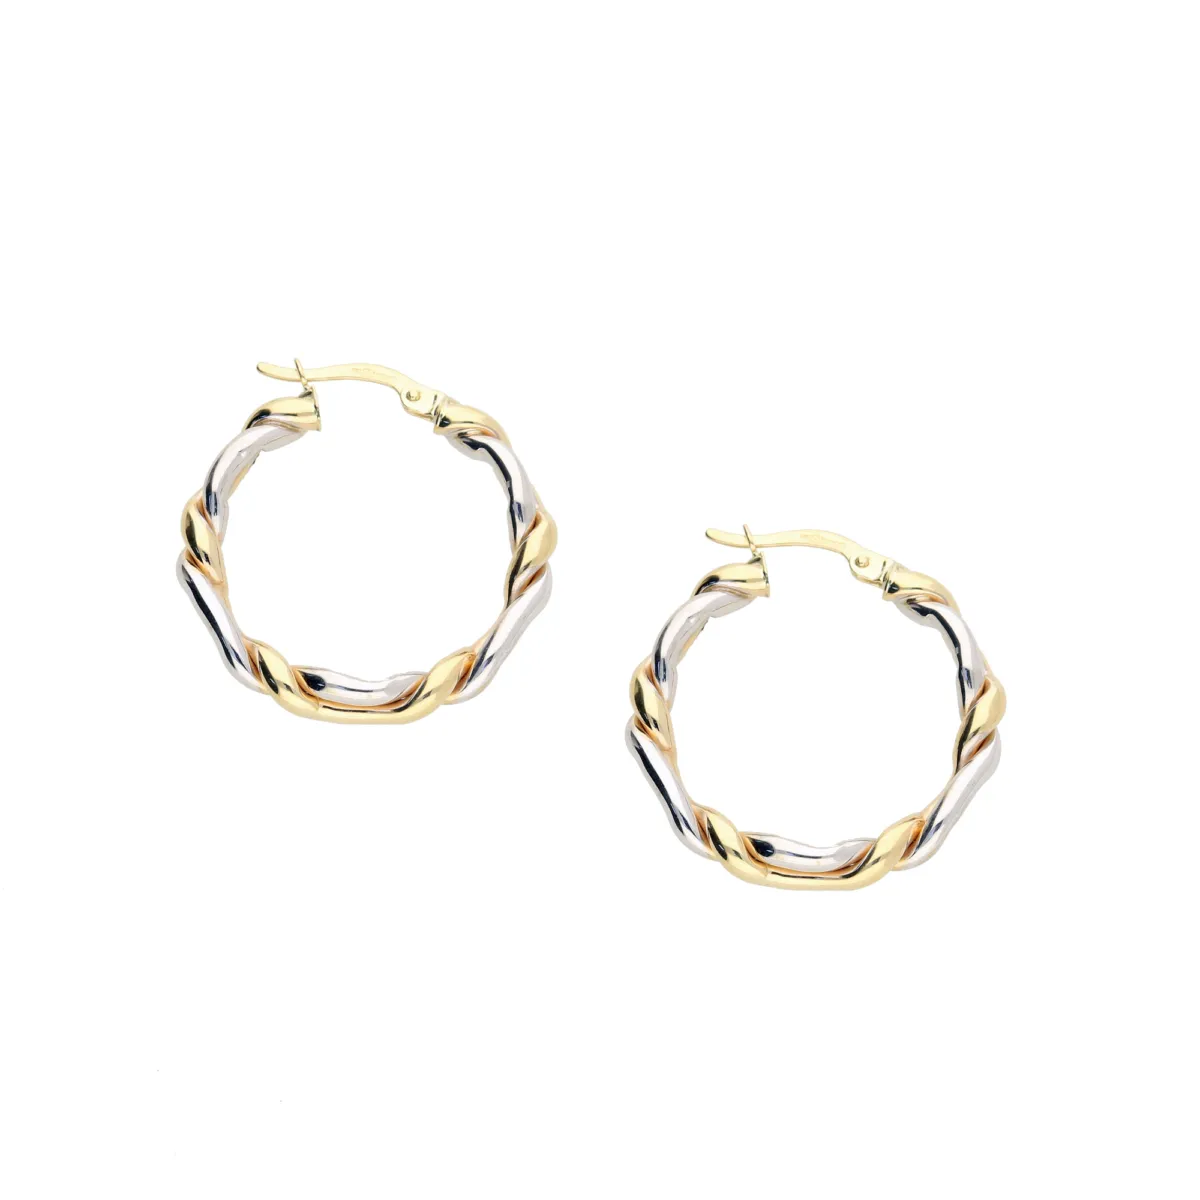 Picture of 9ct yellow and white gold hoop earrings